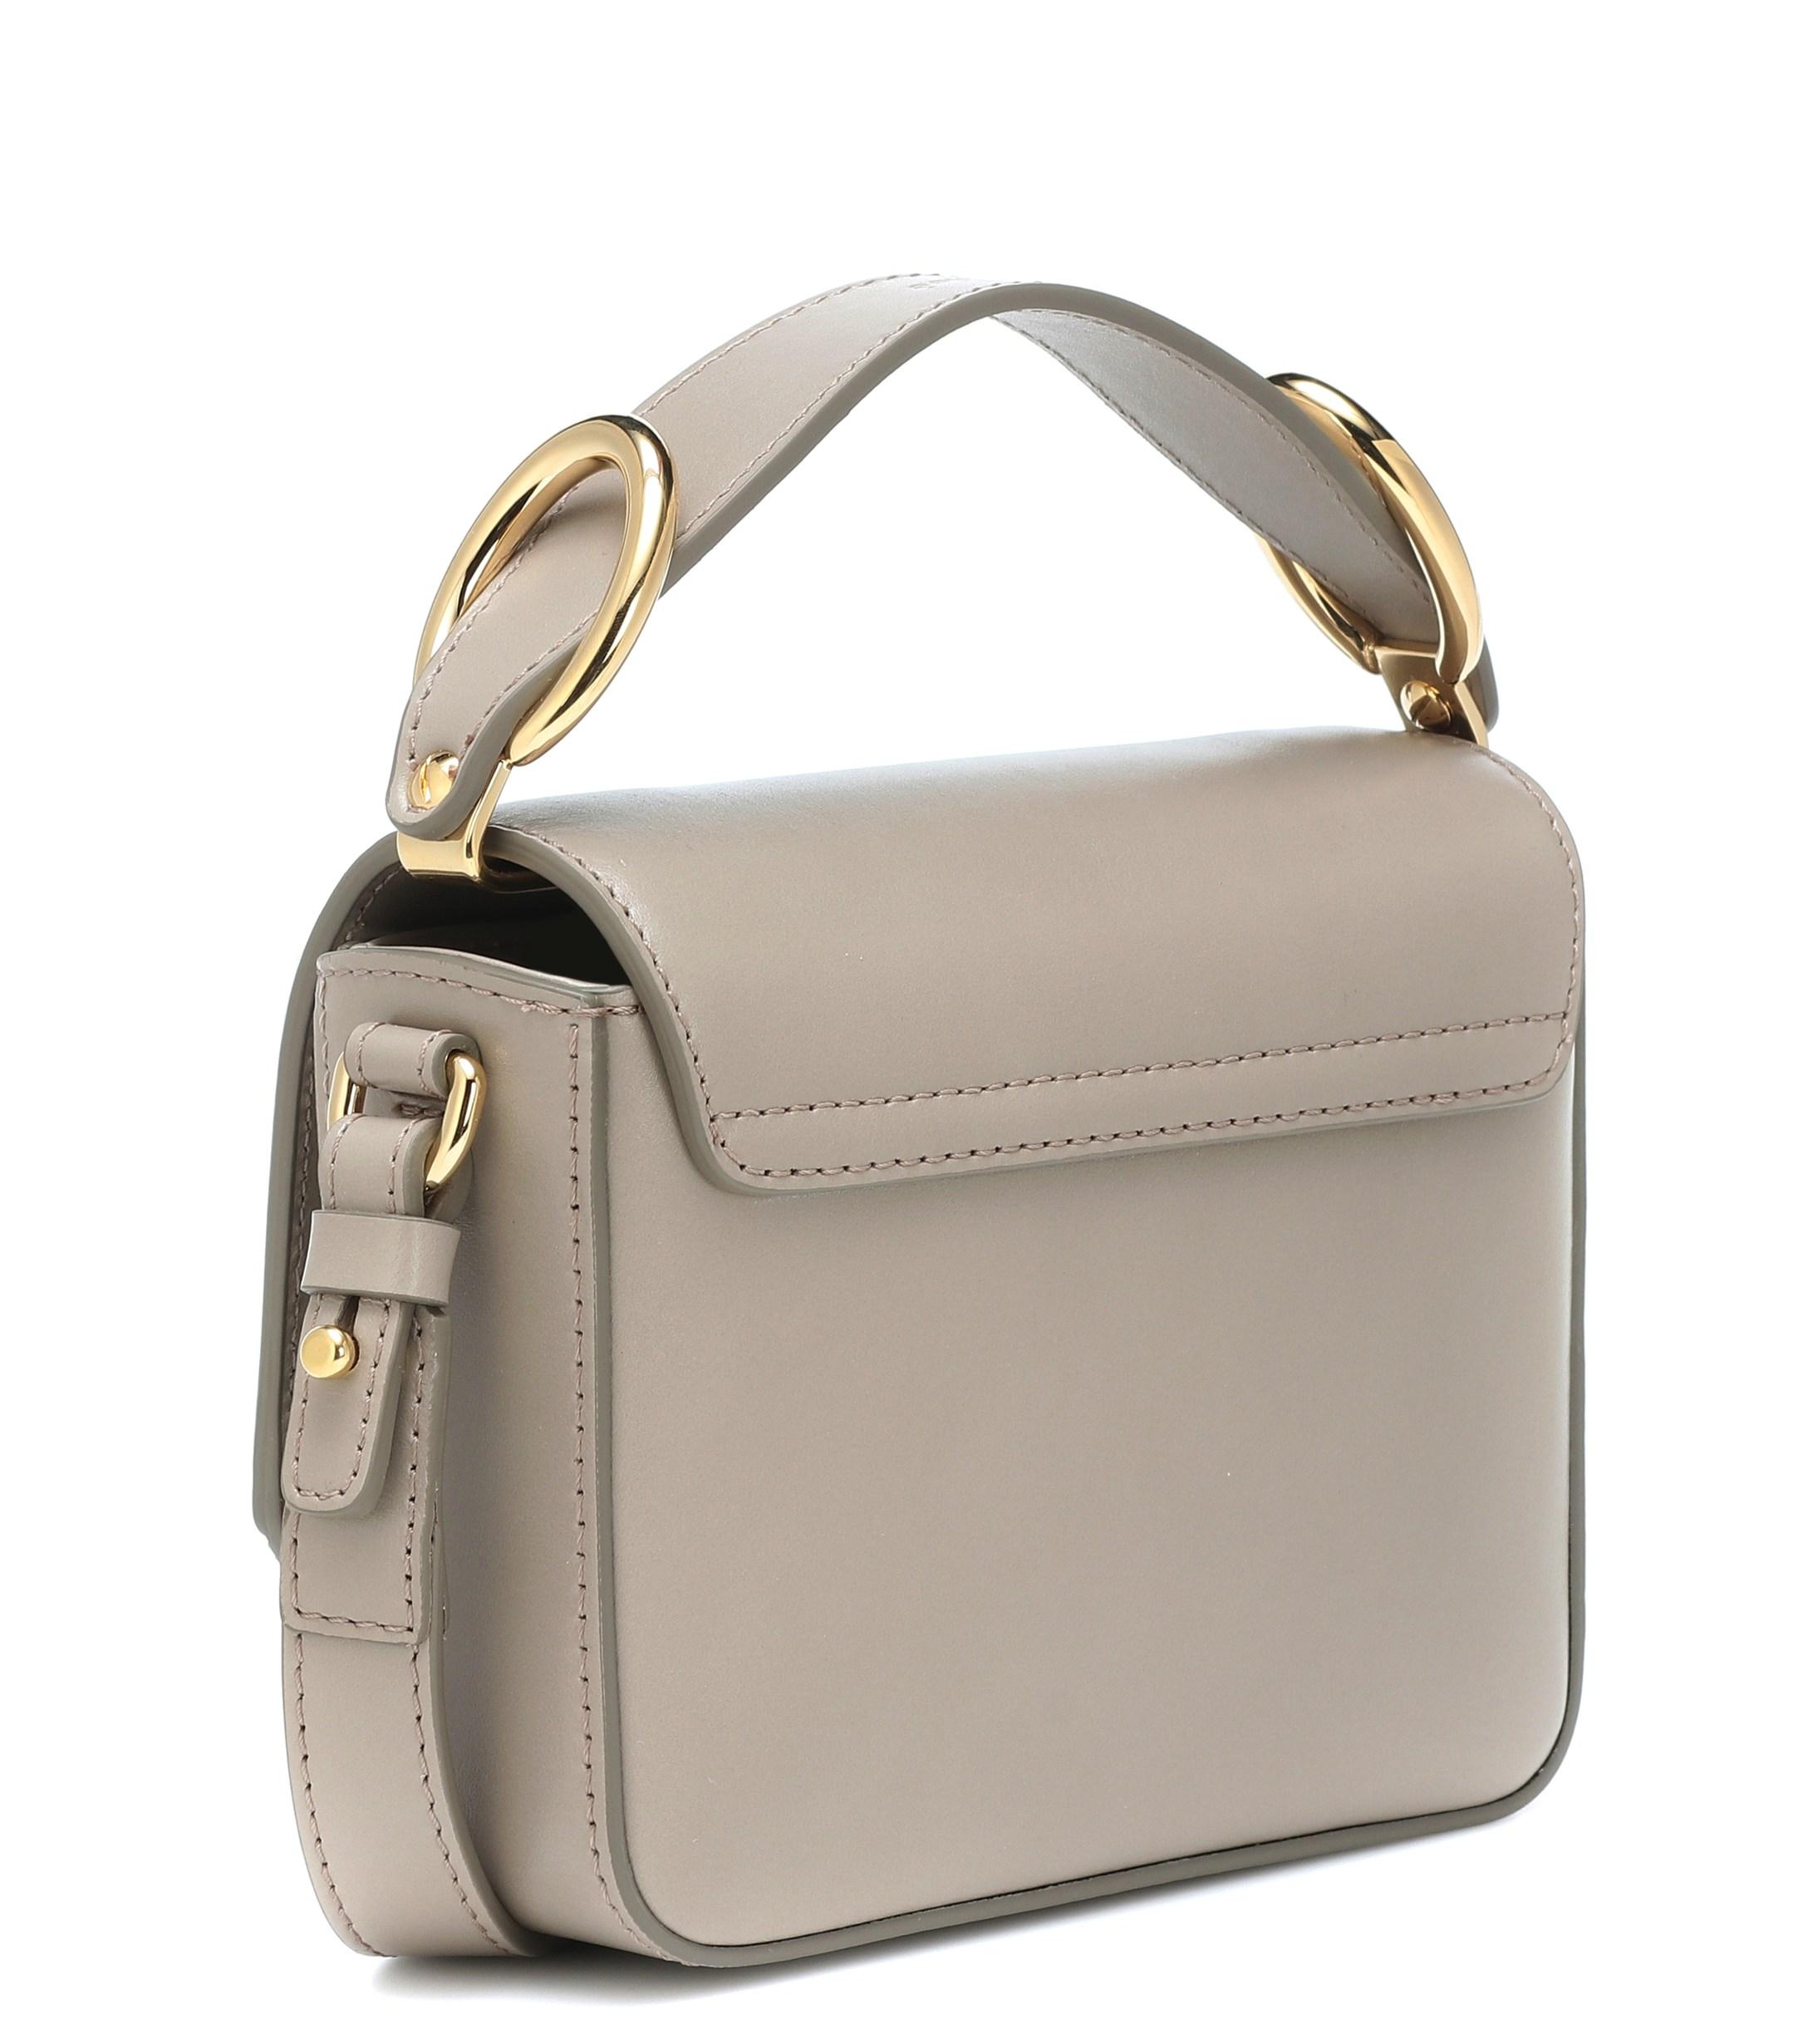 Chloé Small C Suede Trimmed Motty Grey Leather Shoulder Bag - MyDesignerly